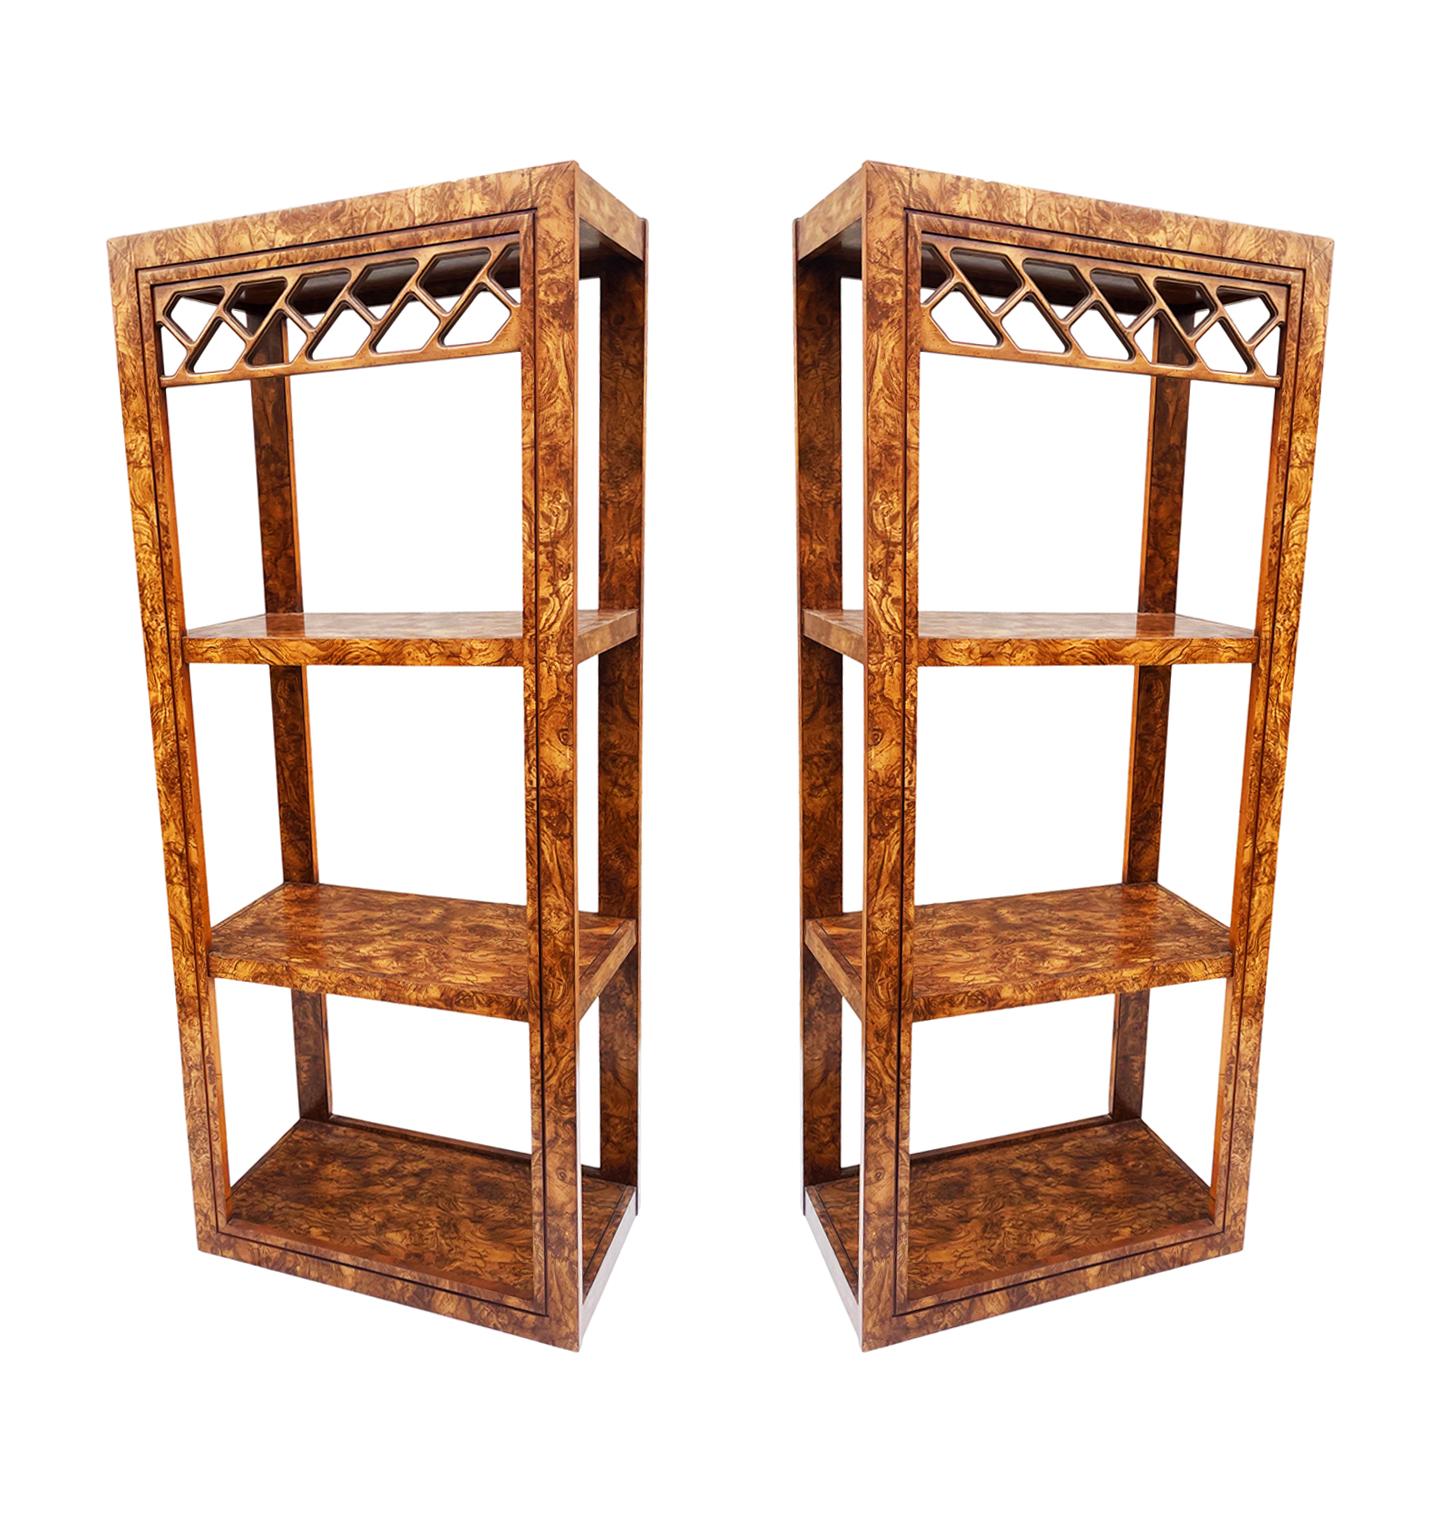 A stunning transitional pair of matching shelving units from the 1970's. They feature burl wood with a decorative lattice work. Price includes the pair.